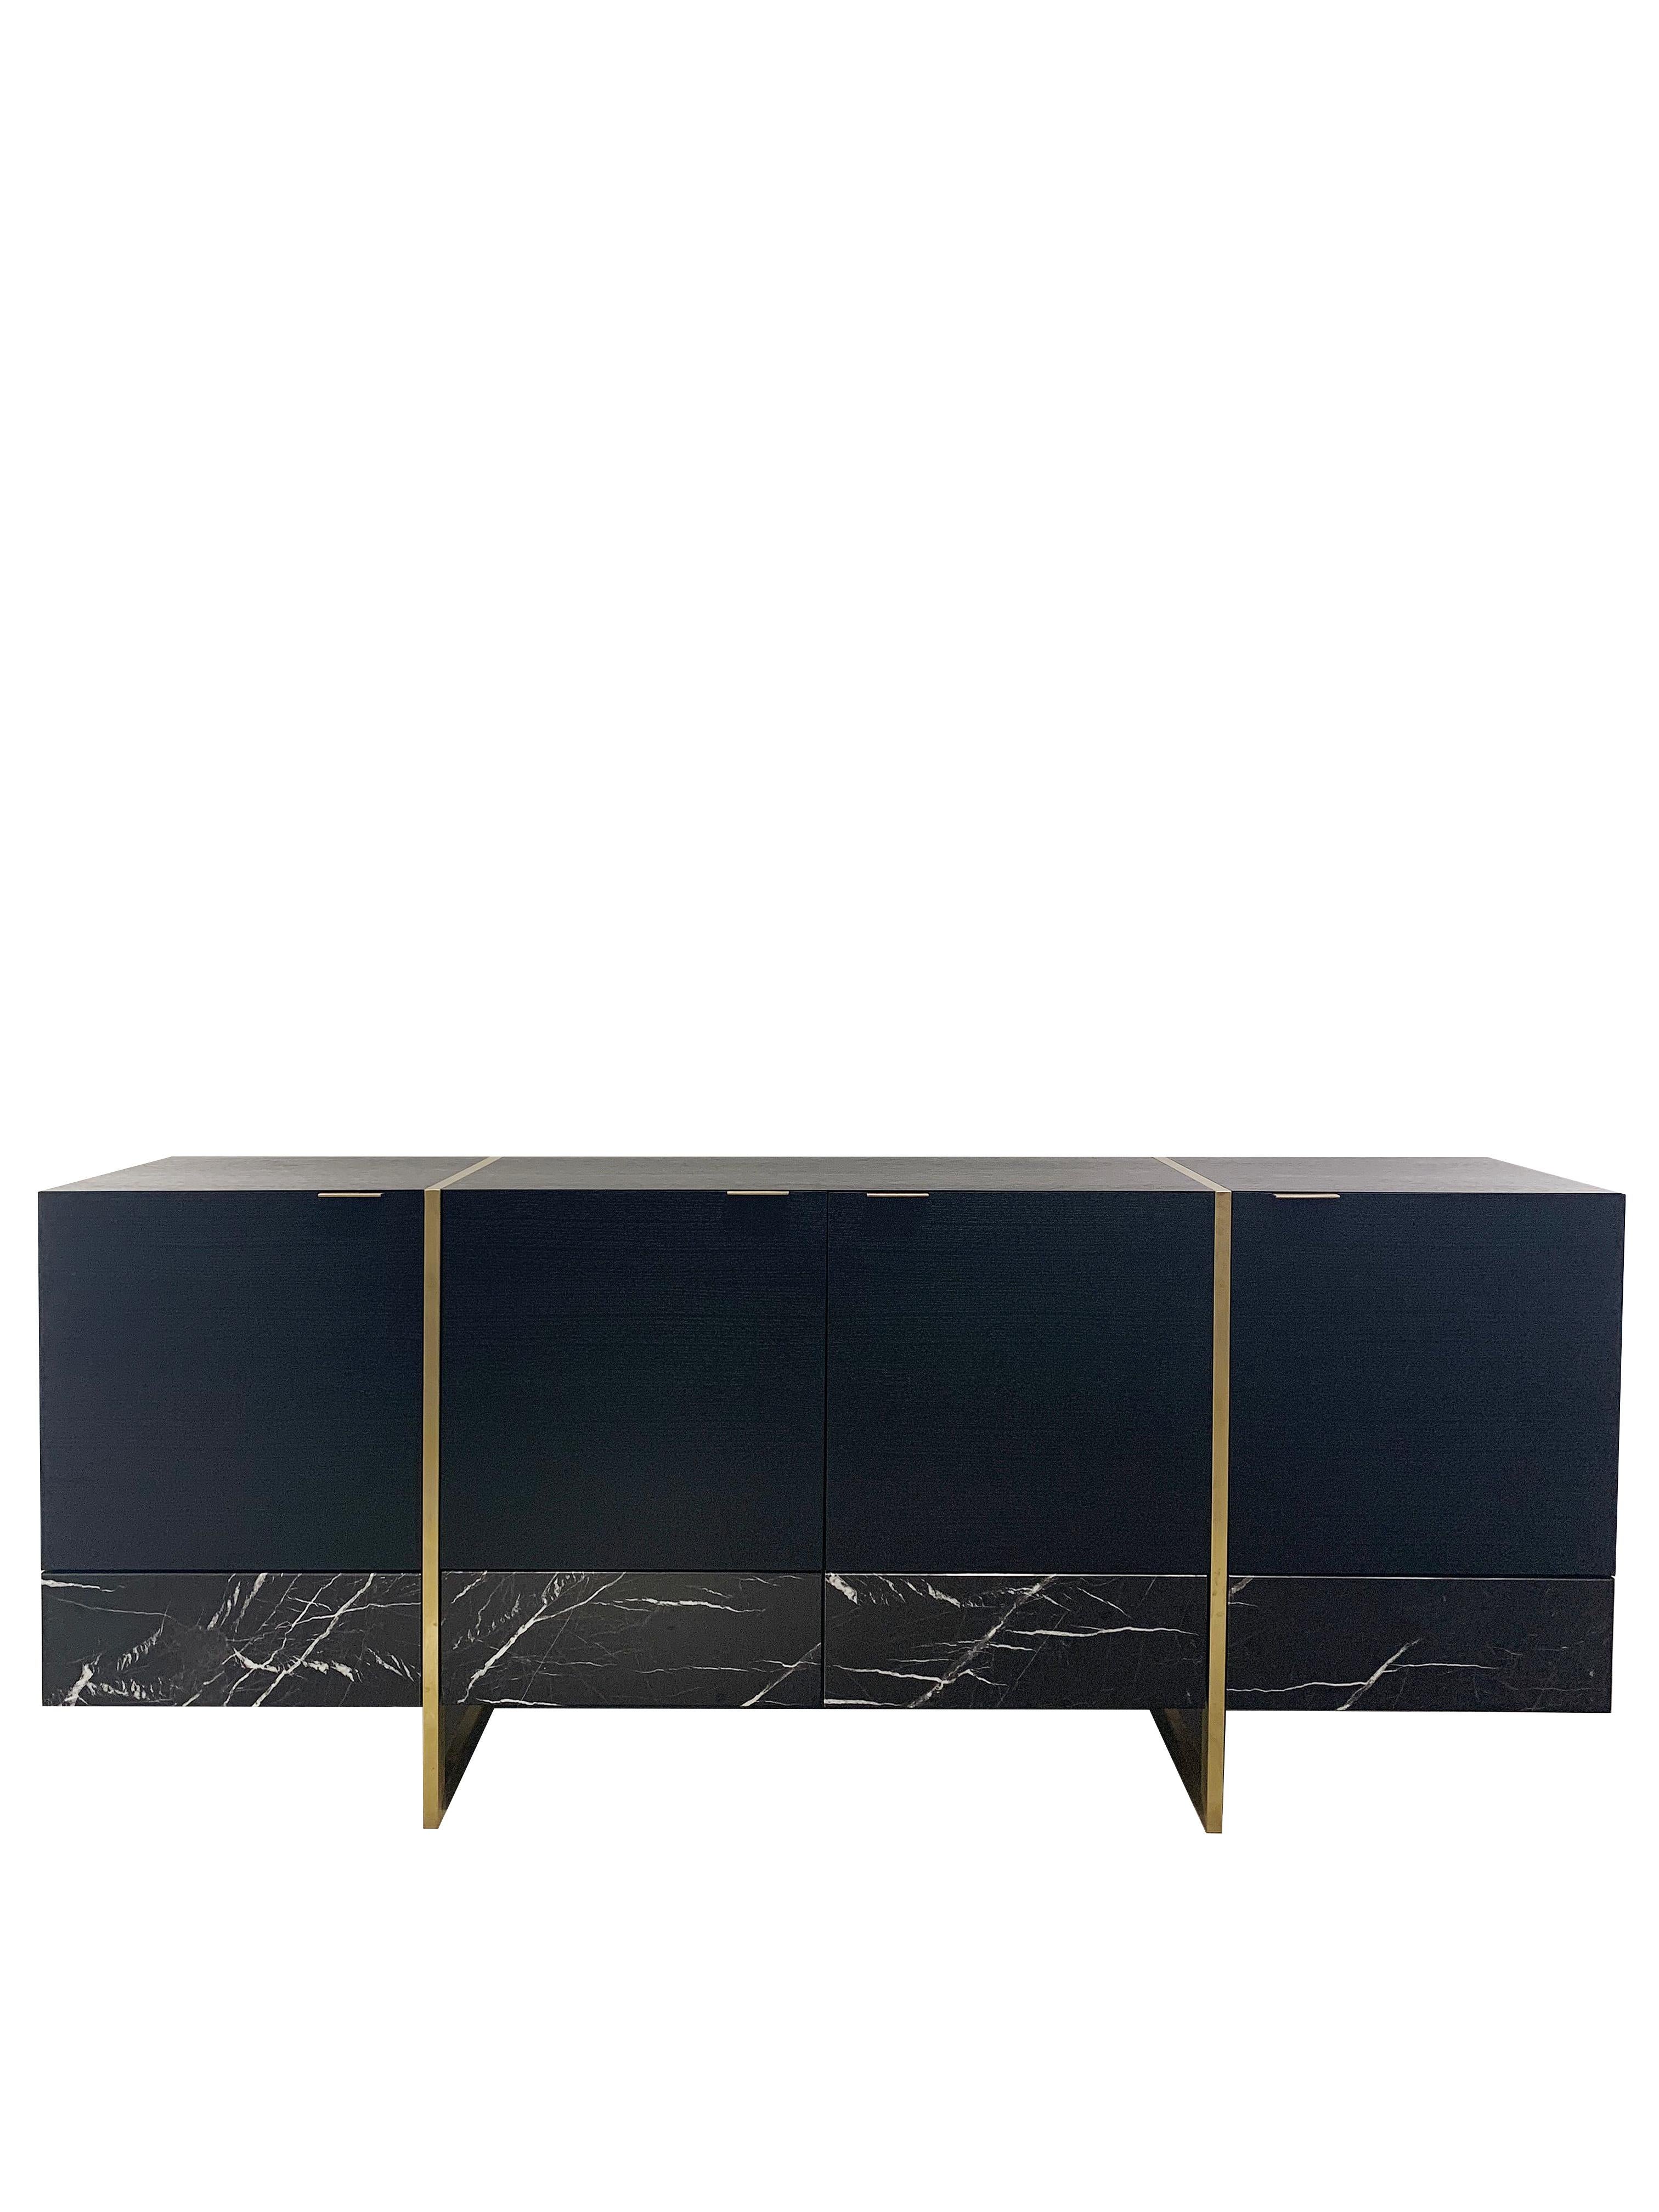 The stripe sideboard is the result of an exploration in combining marble and wood. Also, the slim handles and legs are natural brass.